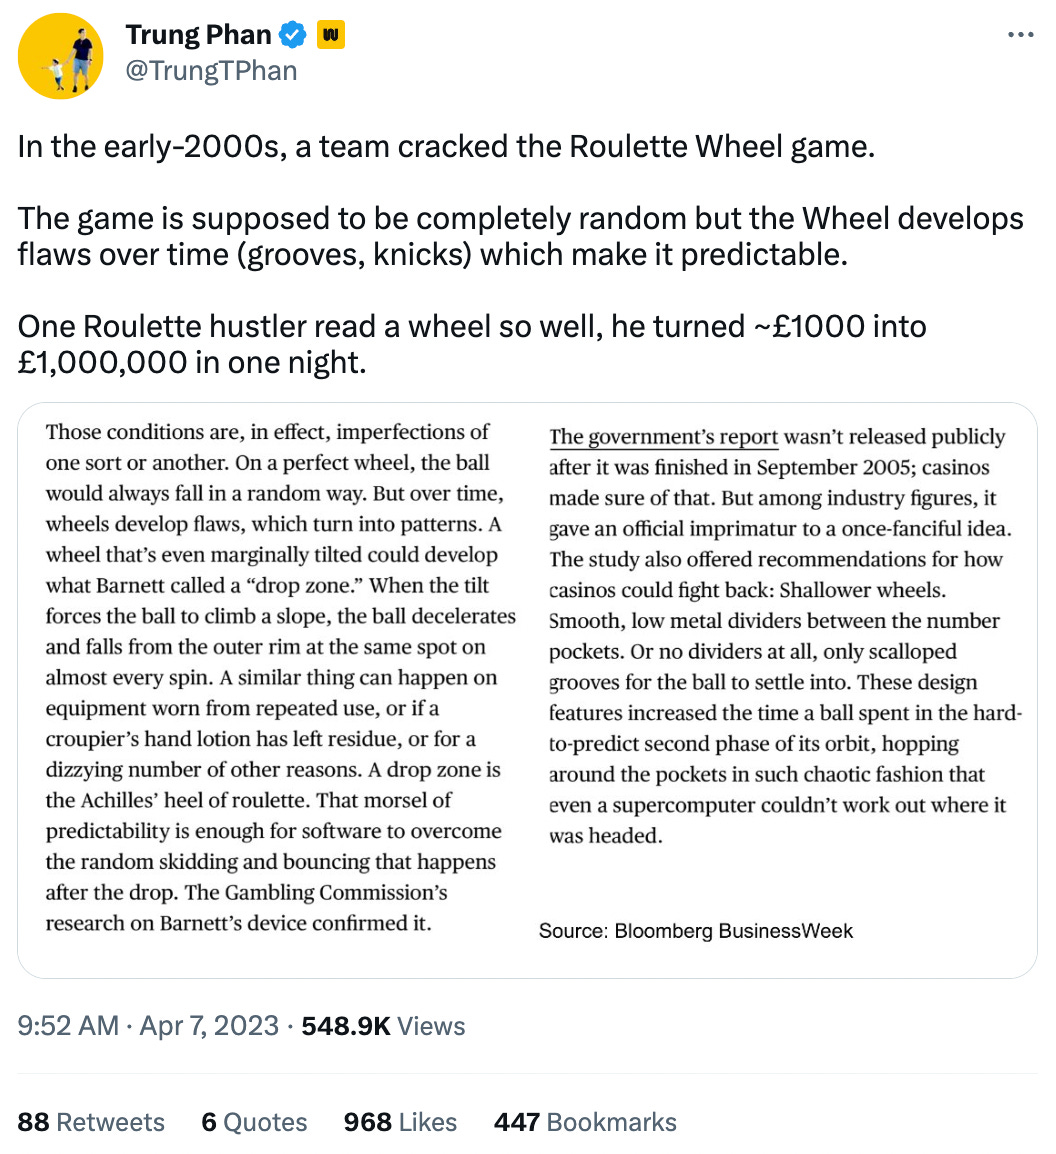 In the early-2000s, a team cracked the Roulette Wheel game.  The game is supposed to be completely random but the Wheel develops flaws over time (grooves, knicks) which make it predictable.  One Roulette hustler read a wheel so well, he turned ~£1000 into £1,000,000 in one night.